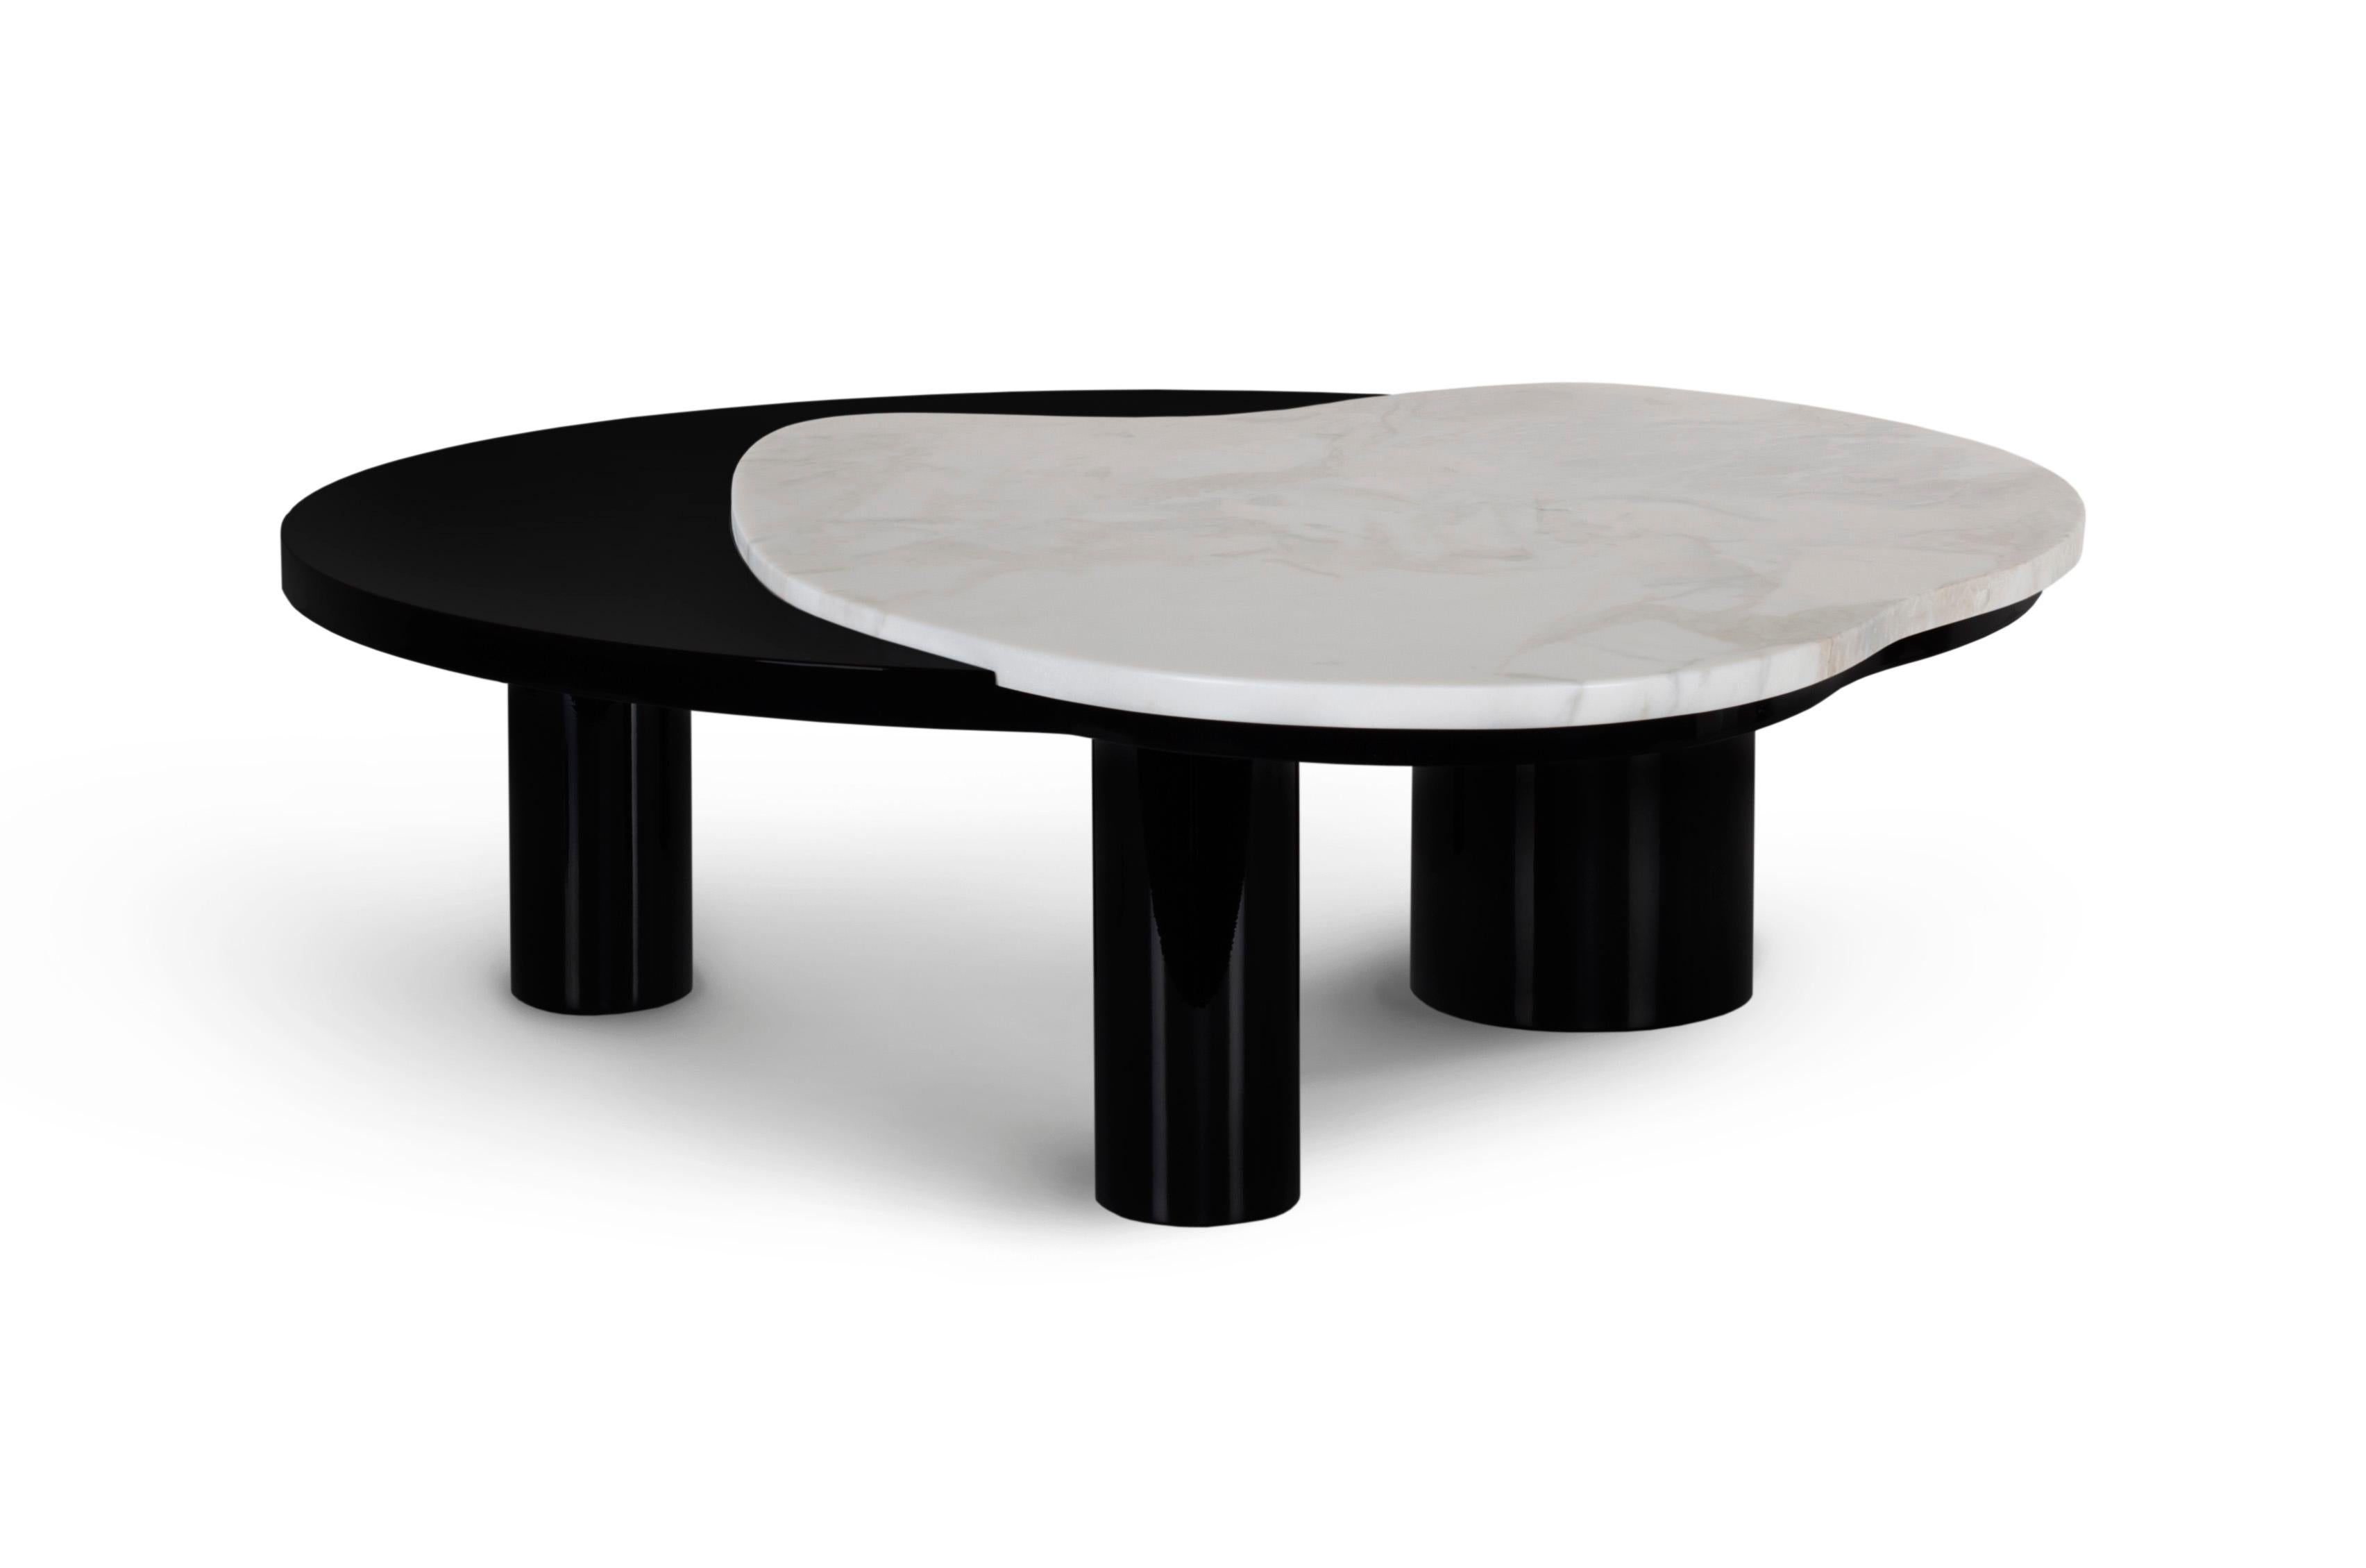 Bordeira coffee table, Contemporary Collection, Handcrafted in Portugal - Europe by Greenapple. 

Designed by Rute Martins for the Contemporary Collection and inspired by the lines of the beautiful Bordeira beach, this low table adds a